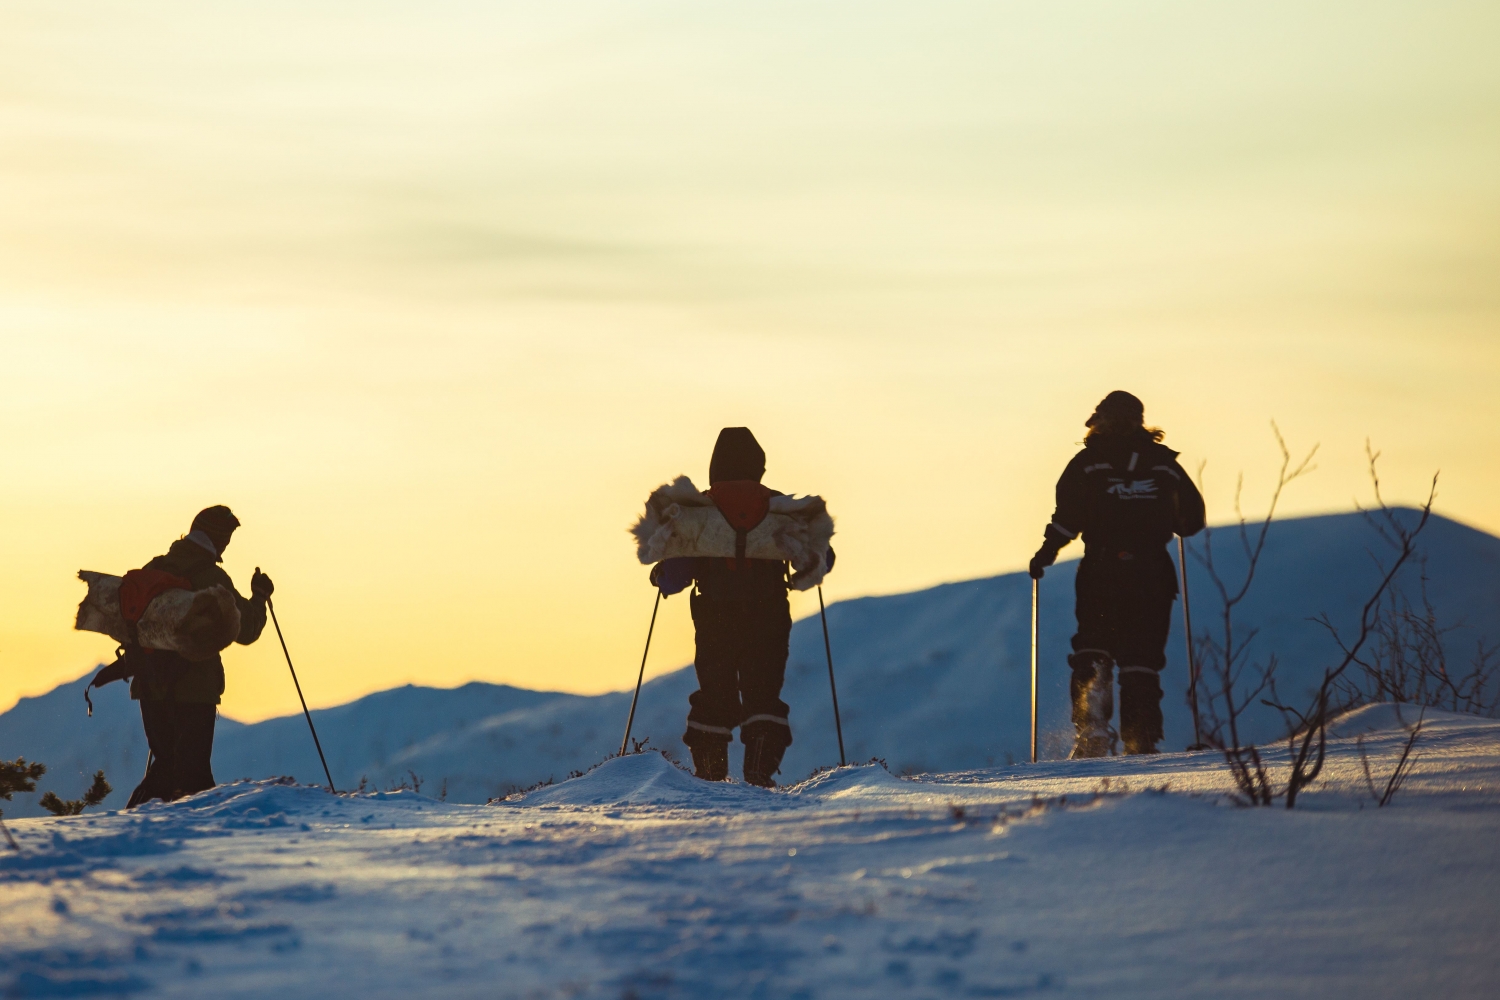 Three persons on snowshoes admiring the yellow coloured sky